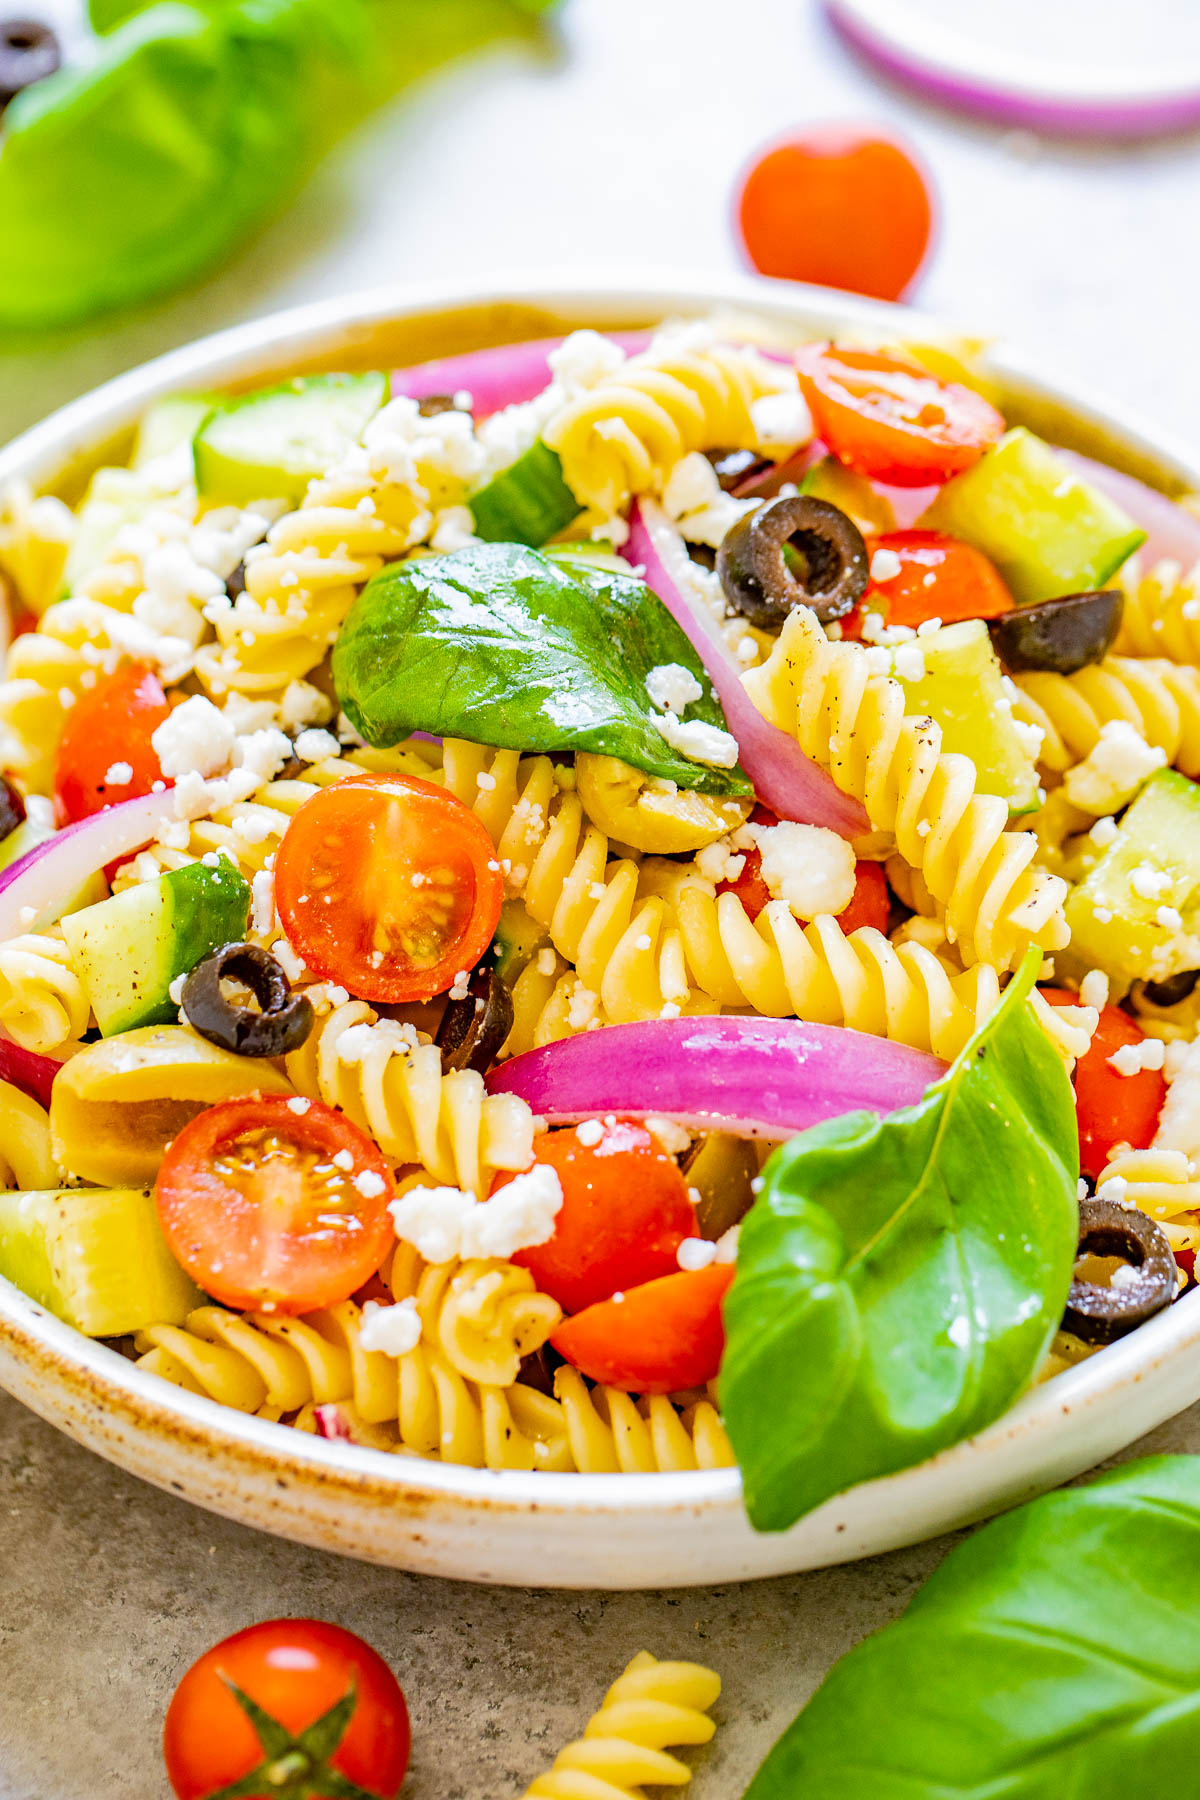 Mediterranean Pasta Salad - Juicy tomatoes and cucumbers, black and green olives, crumbled feta, and tender pasta are tossed in a homemade balsamic vinaigrette! An EASY pasta salad recipe with Mediterranean-inspired ingredients that's ready in under 30 minutes! It makes a big batch and is perfect for potlucks, picnics, or planned leftovers.